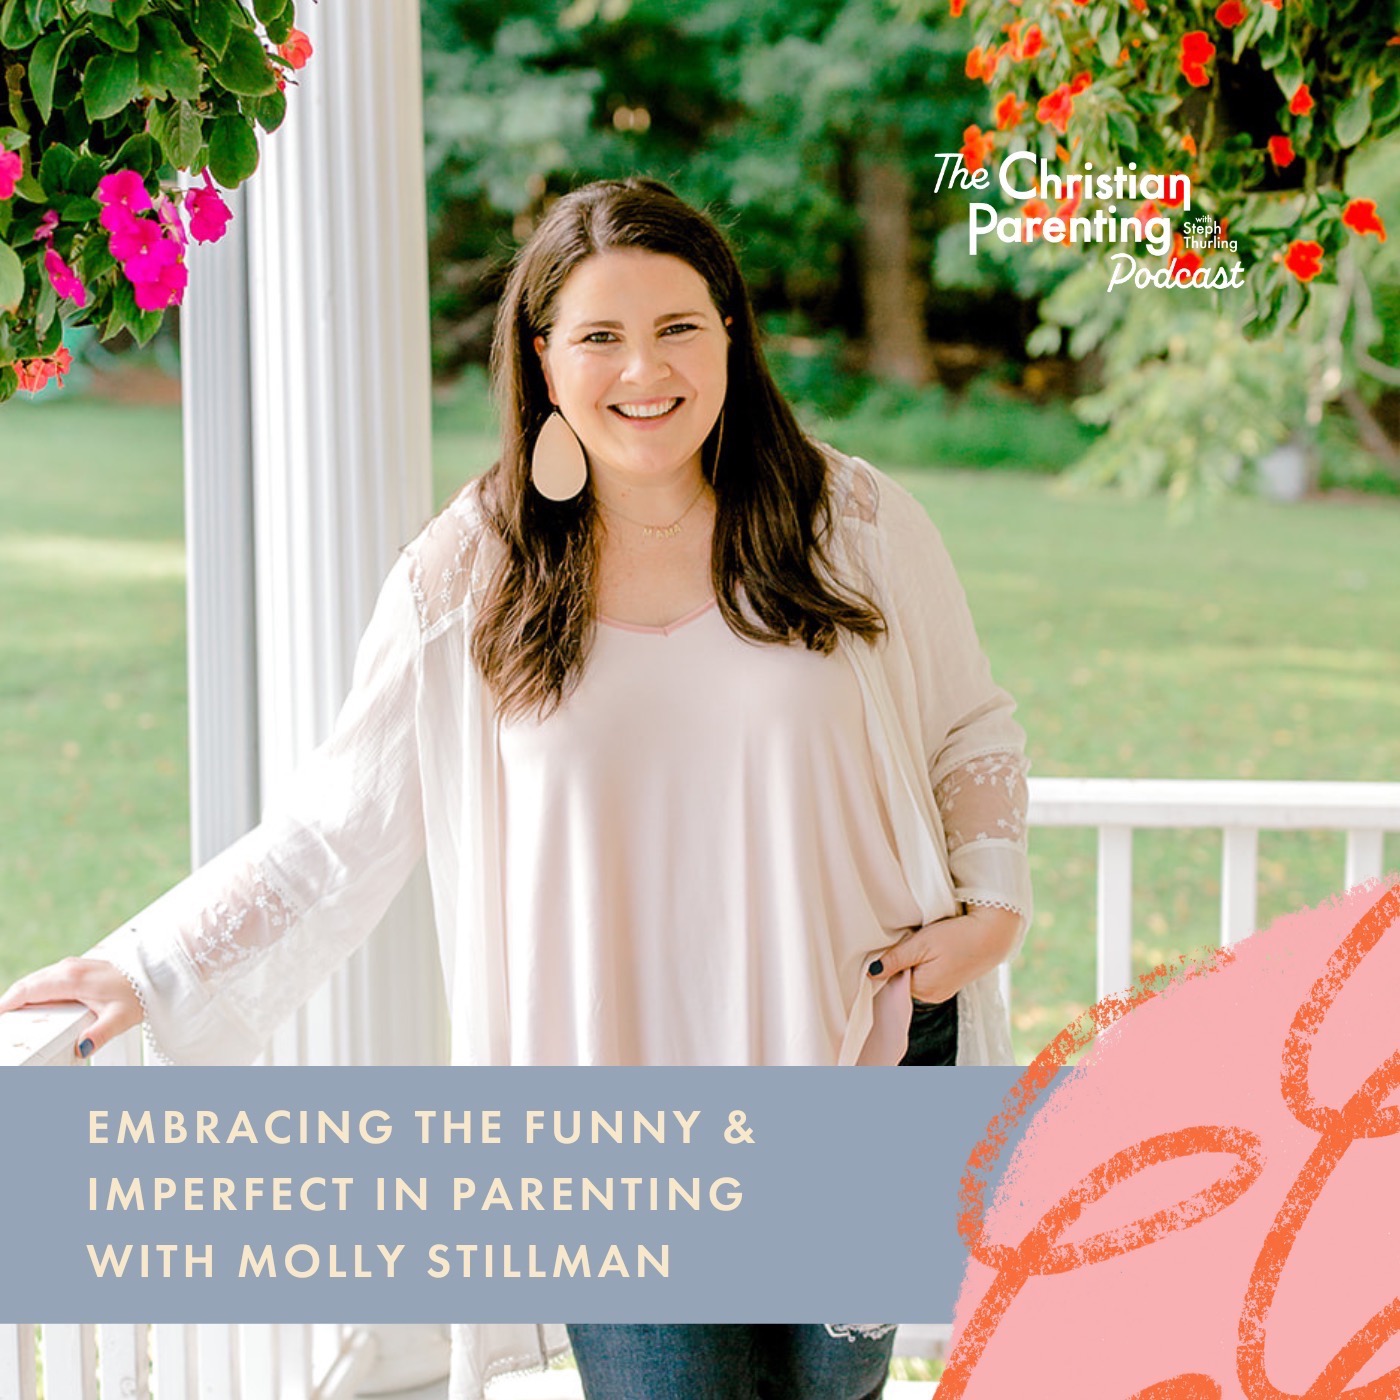 Embracing the funny & imperfect in parenting with Molly Stillman